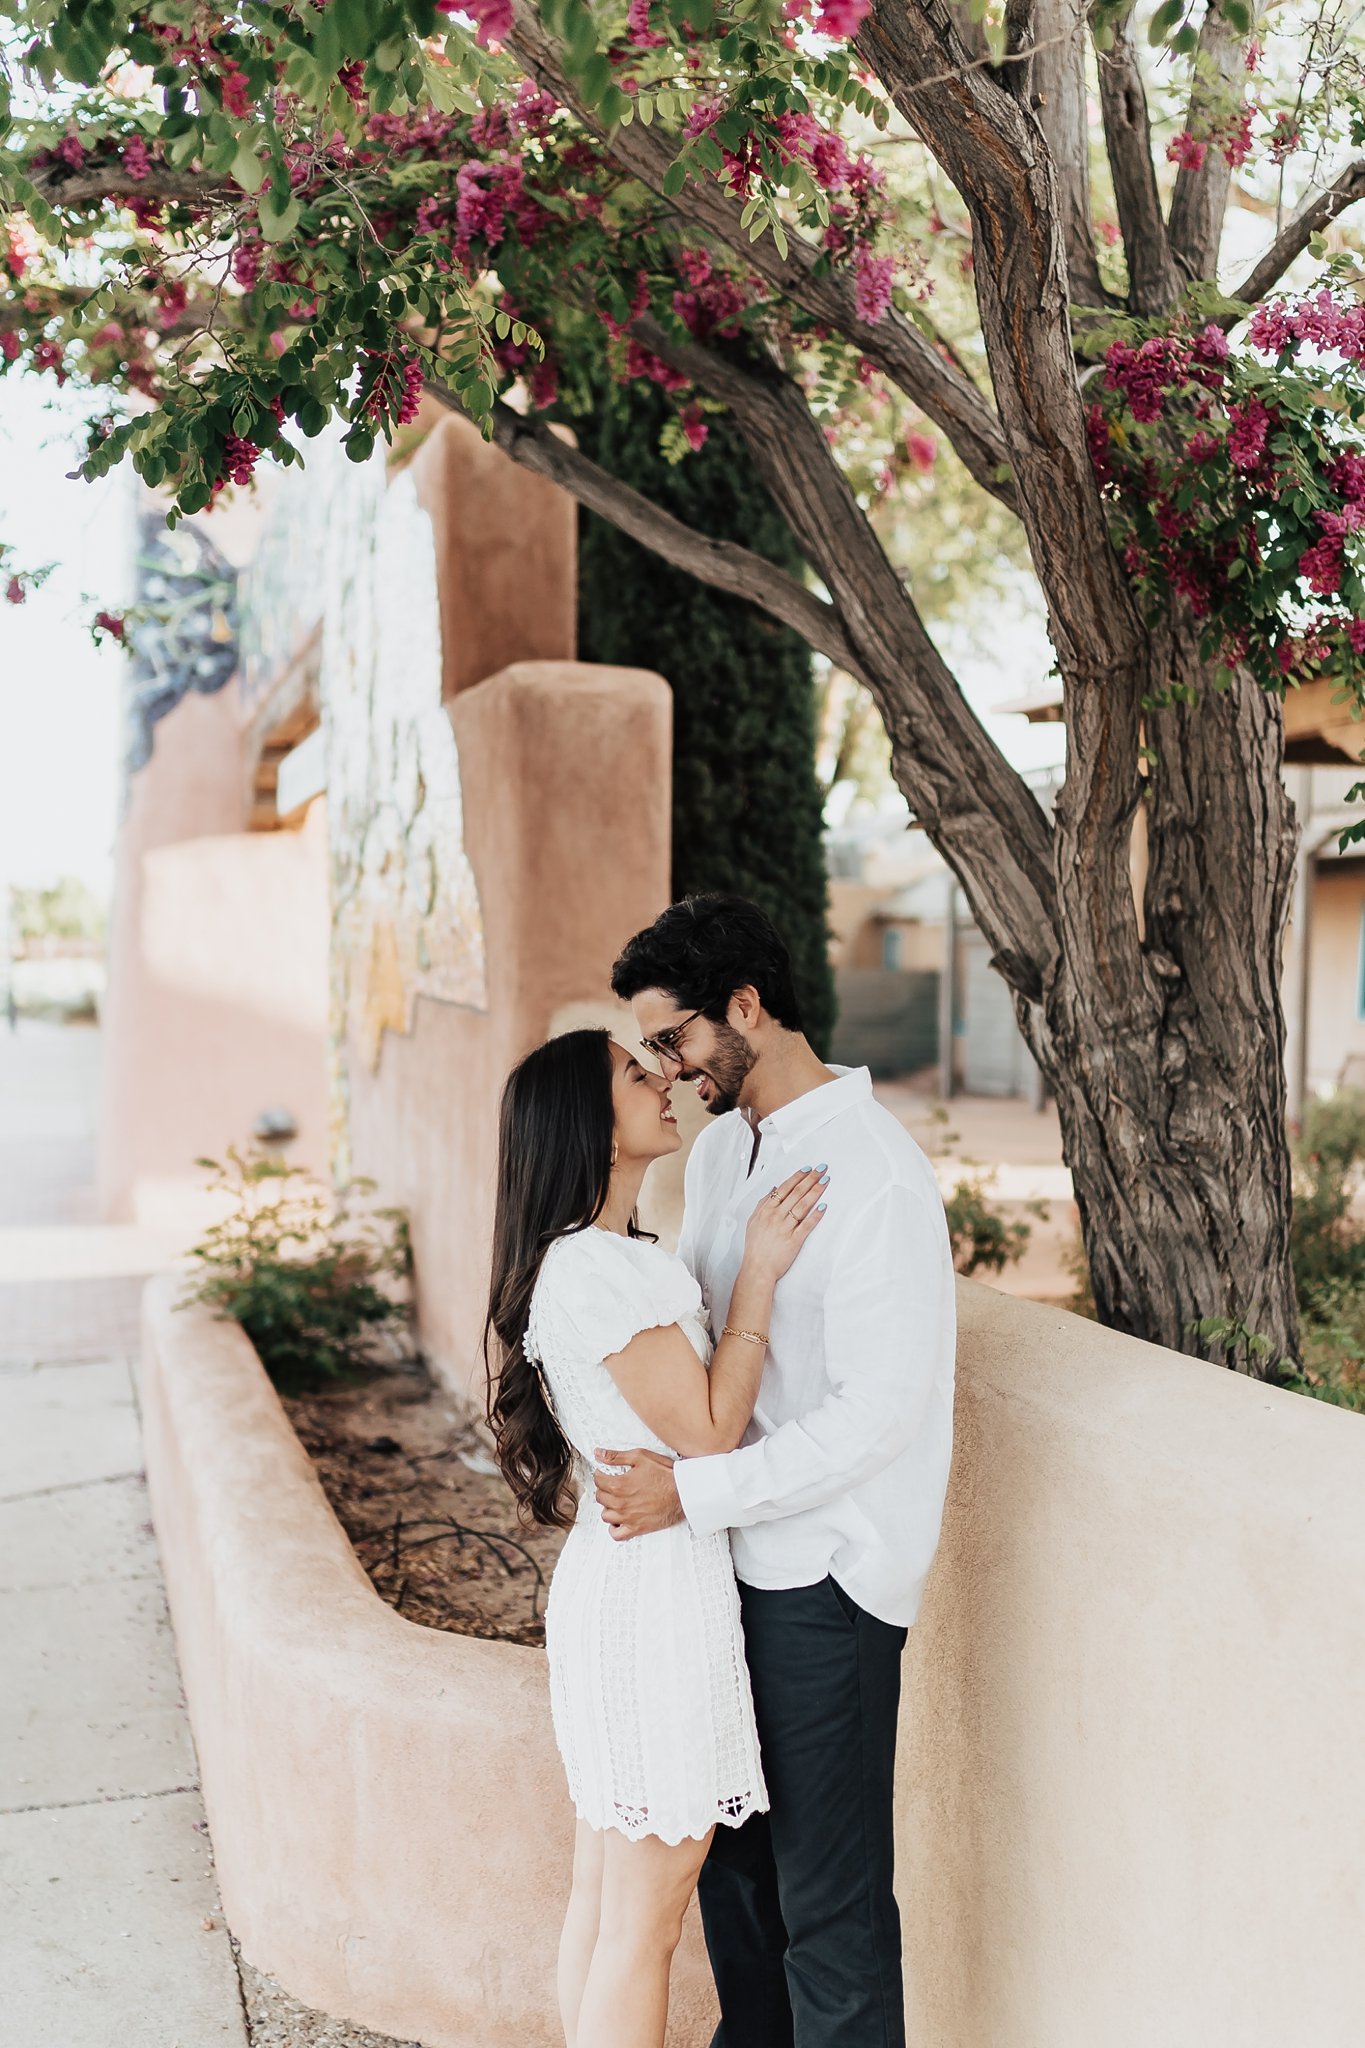 Alicia+lucia+photography+-+albuquerque+wedding+photographer+-+santa+fe+wedding+photography+-+new+mexico+wedding+photographer+-+new+mexico+wedding+-+old+town+engagement+-+old+town+wedding+-+southwest+engagement_0025.jpg